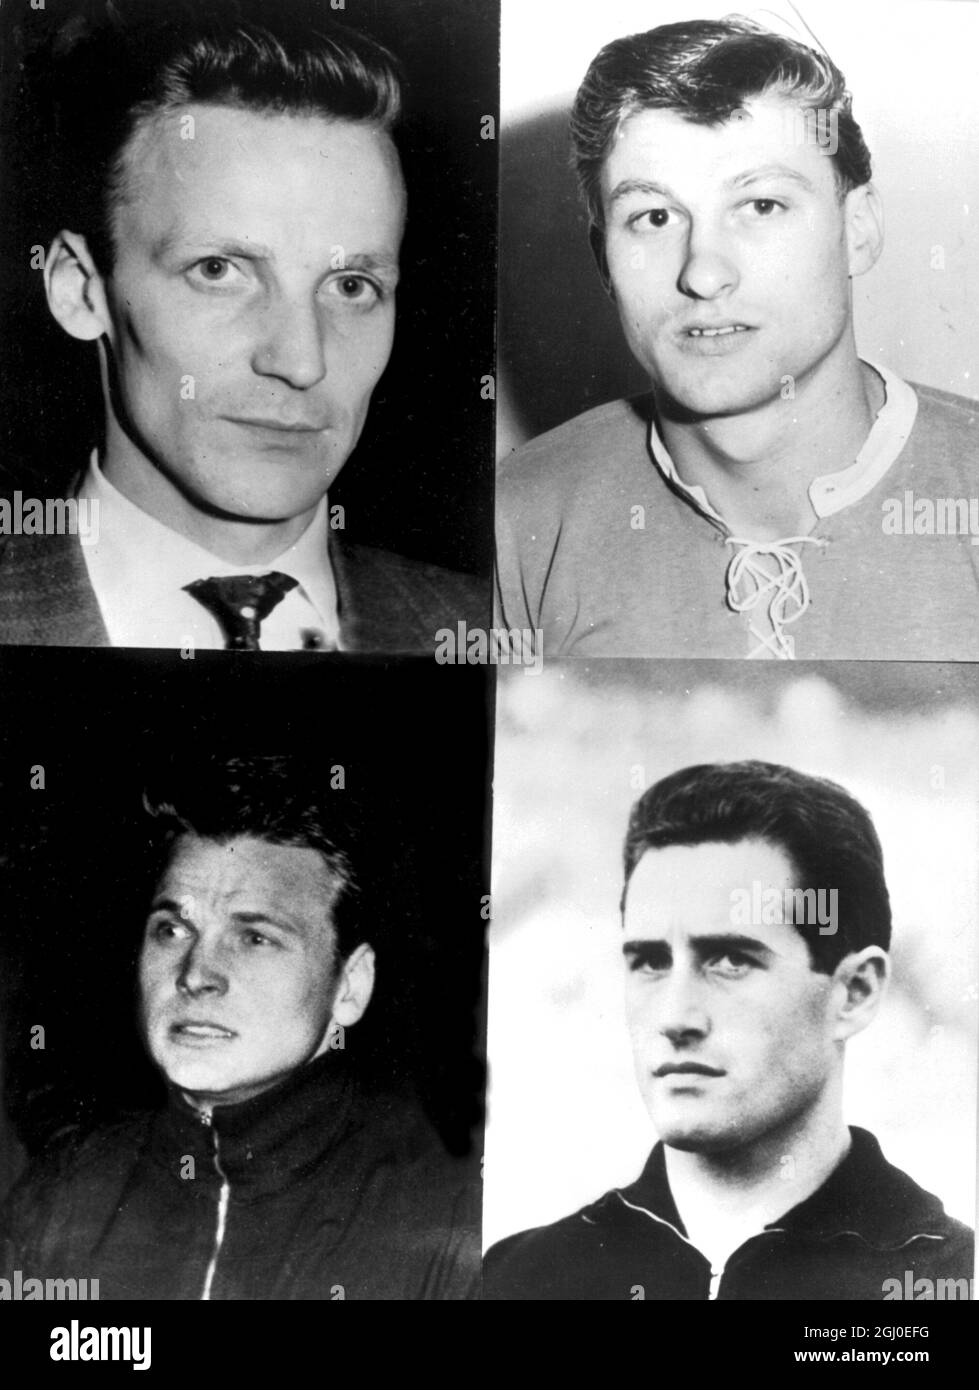 Members of the West German football team expected to play in the World Championships in Chile in 1962. they are left to right, top row :Berti Kraus (forward), Friedel Lutz (defence). Bottom row, left to right:Hans Tilkowski (goalkeeper), and Thielen (forward). 18th December 1961. Stock Photo